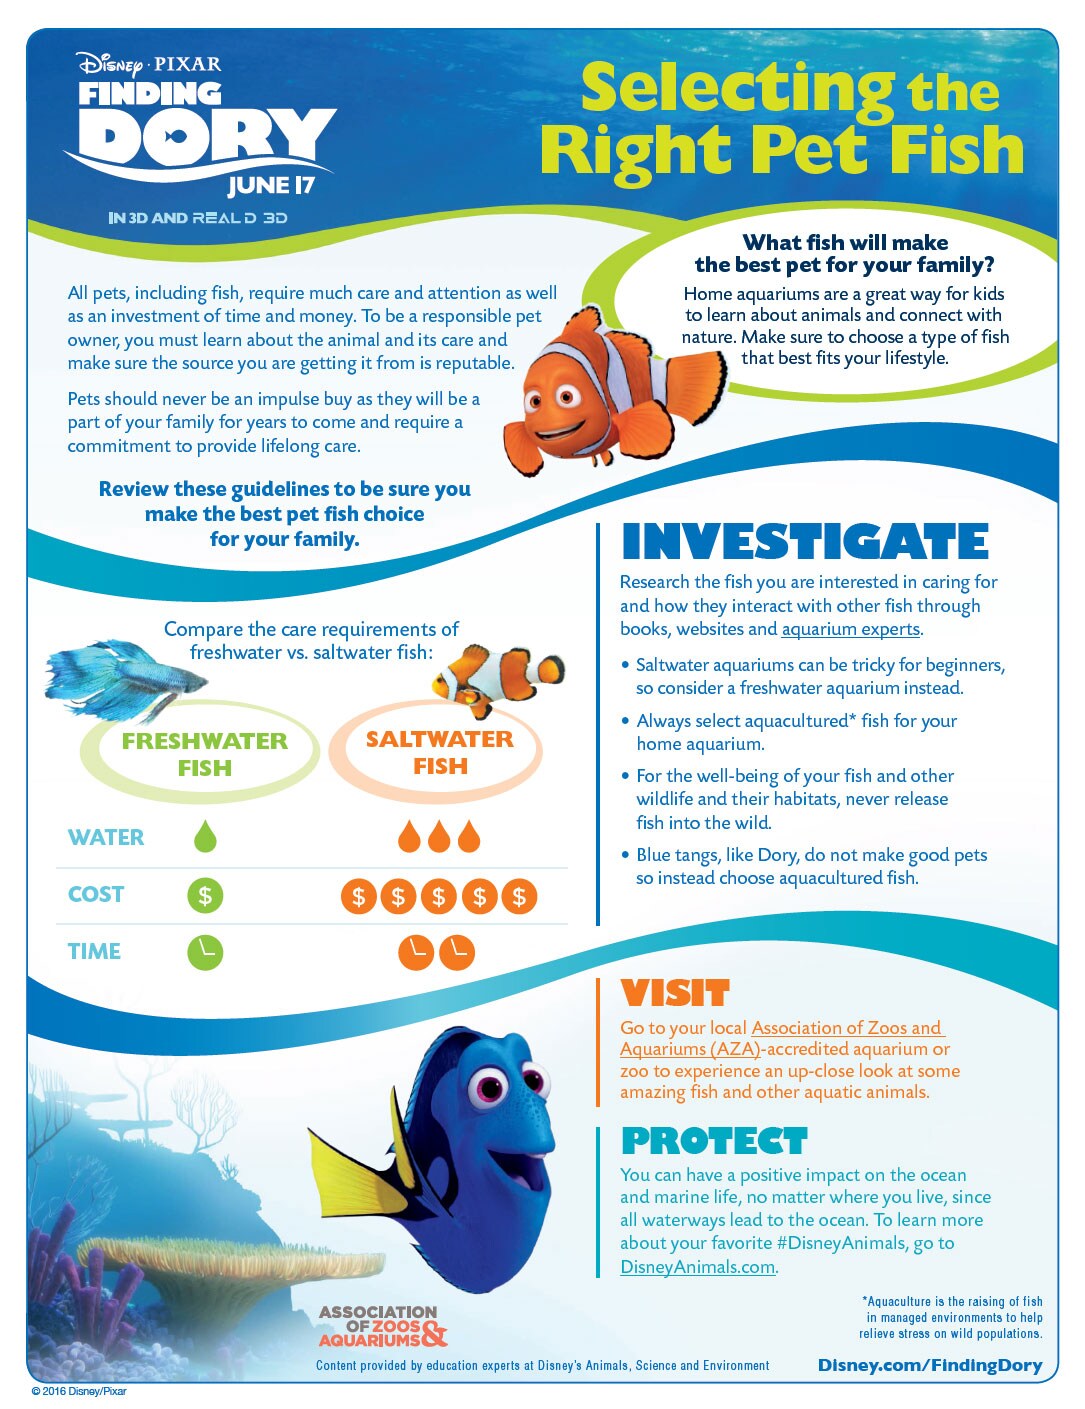 Wildlife Wednesday: Celebrate Speak Like a Whale Day at The Seas with Nemo & Friends June 11